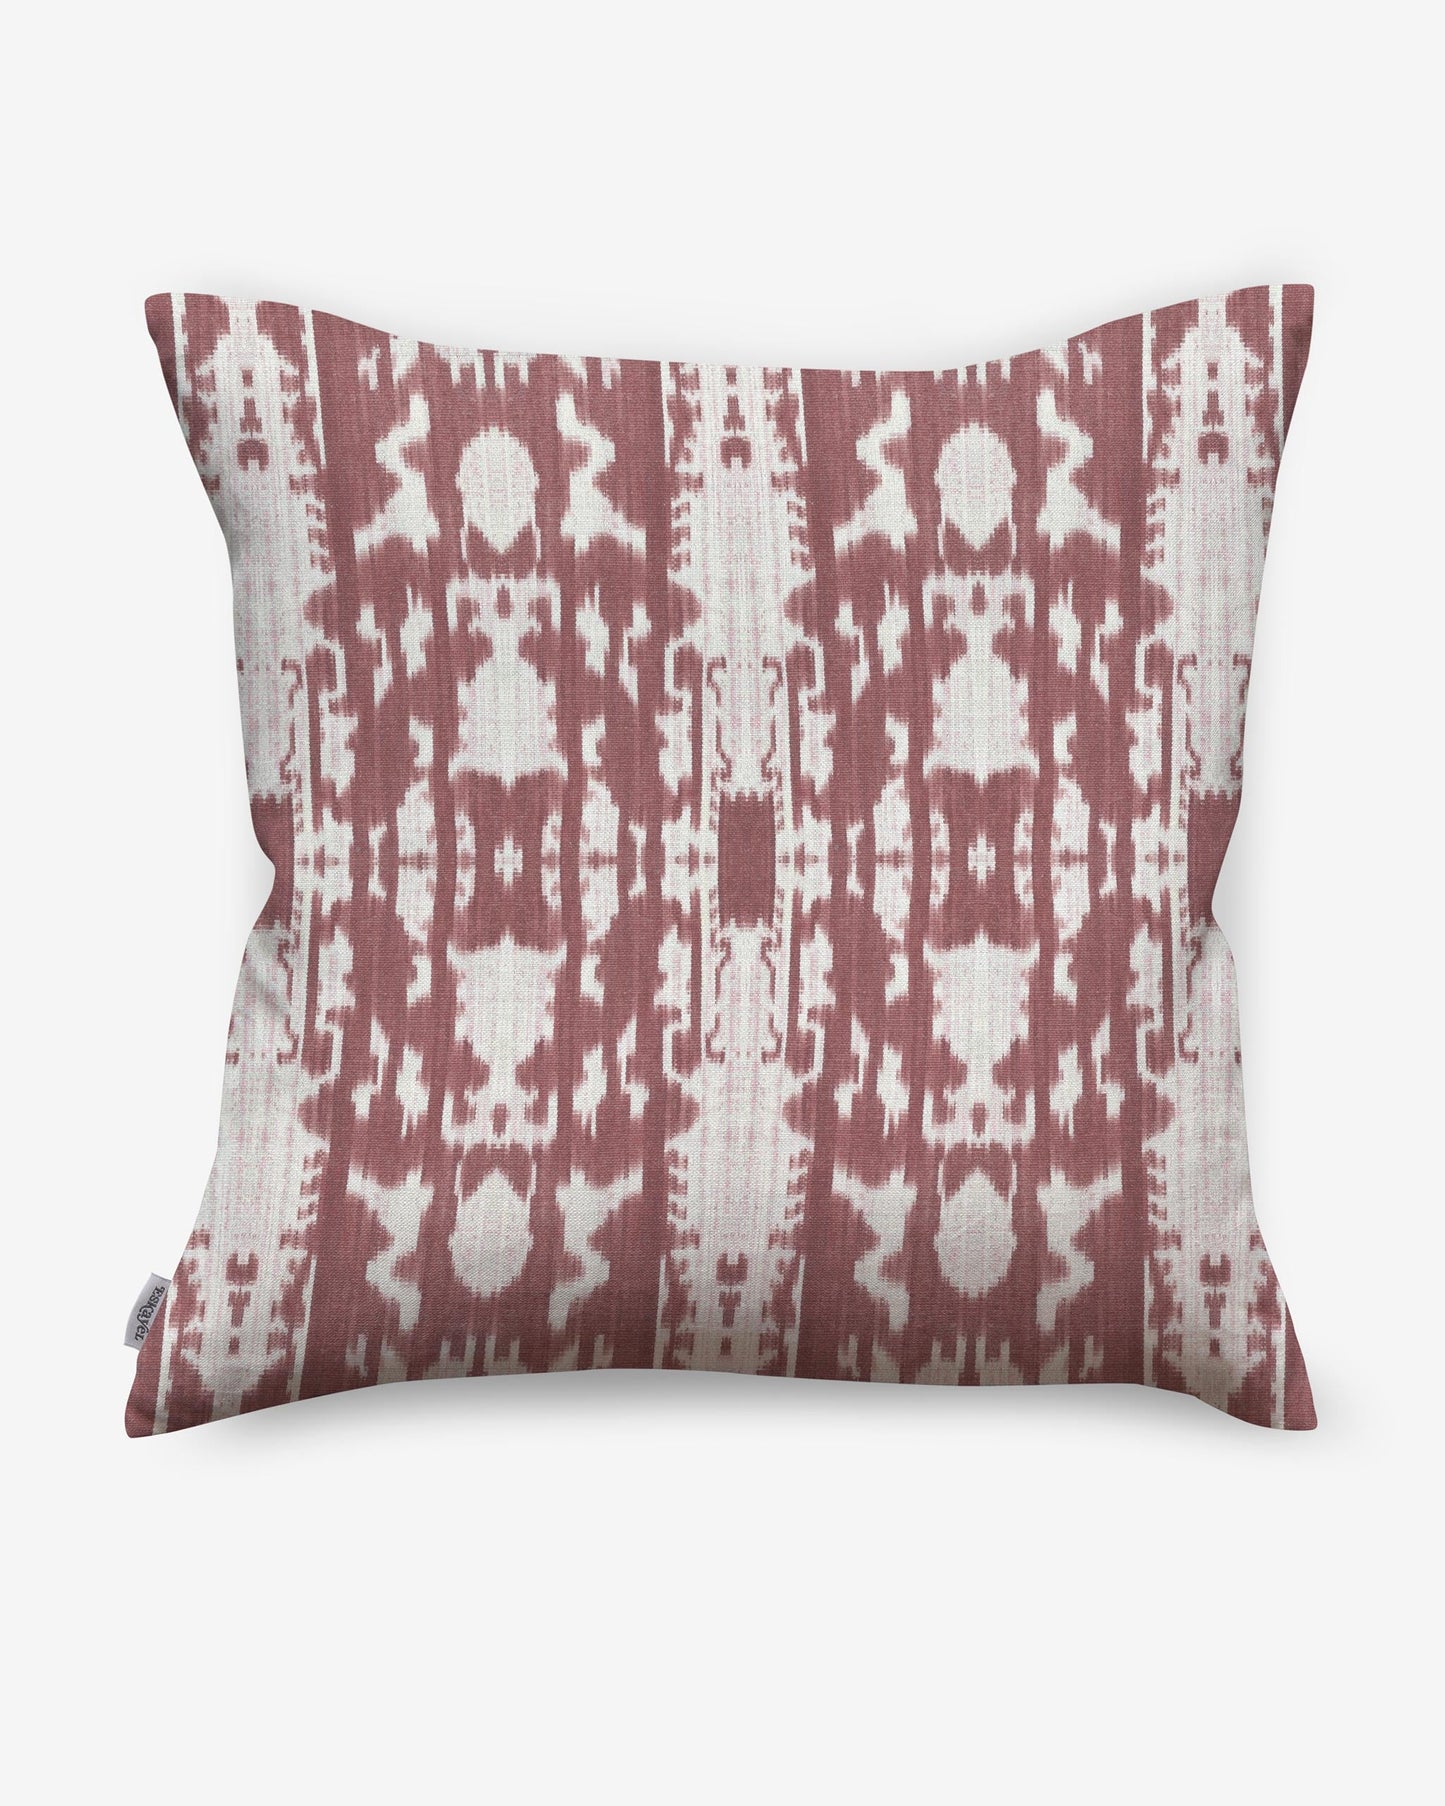 A Biami Pillow with an abstract pattern, perfect for adding a touch of luxury to any room